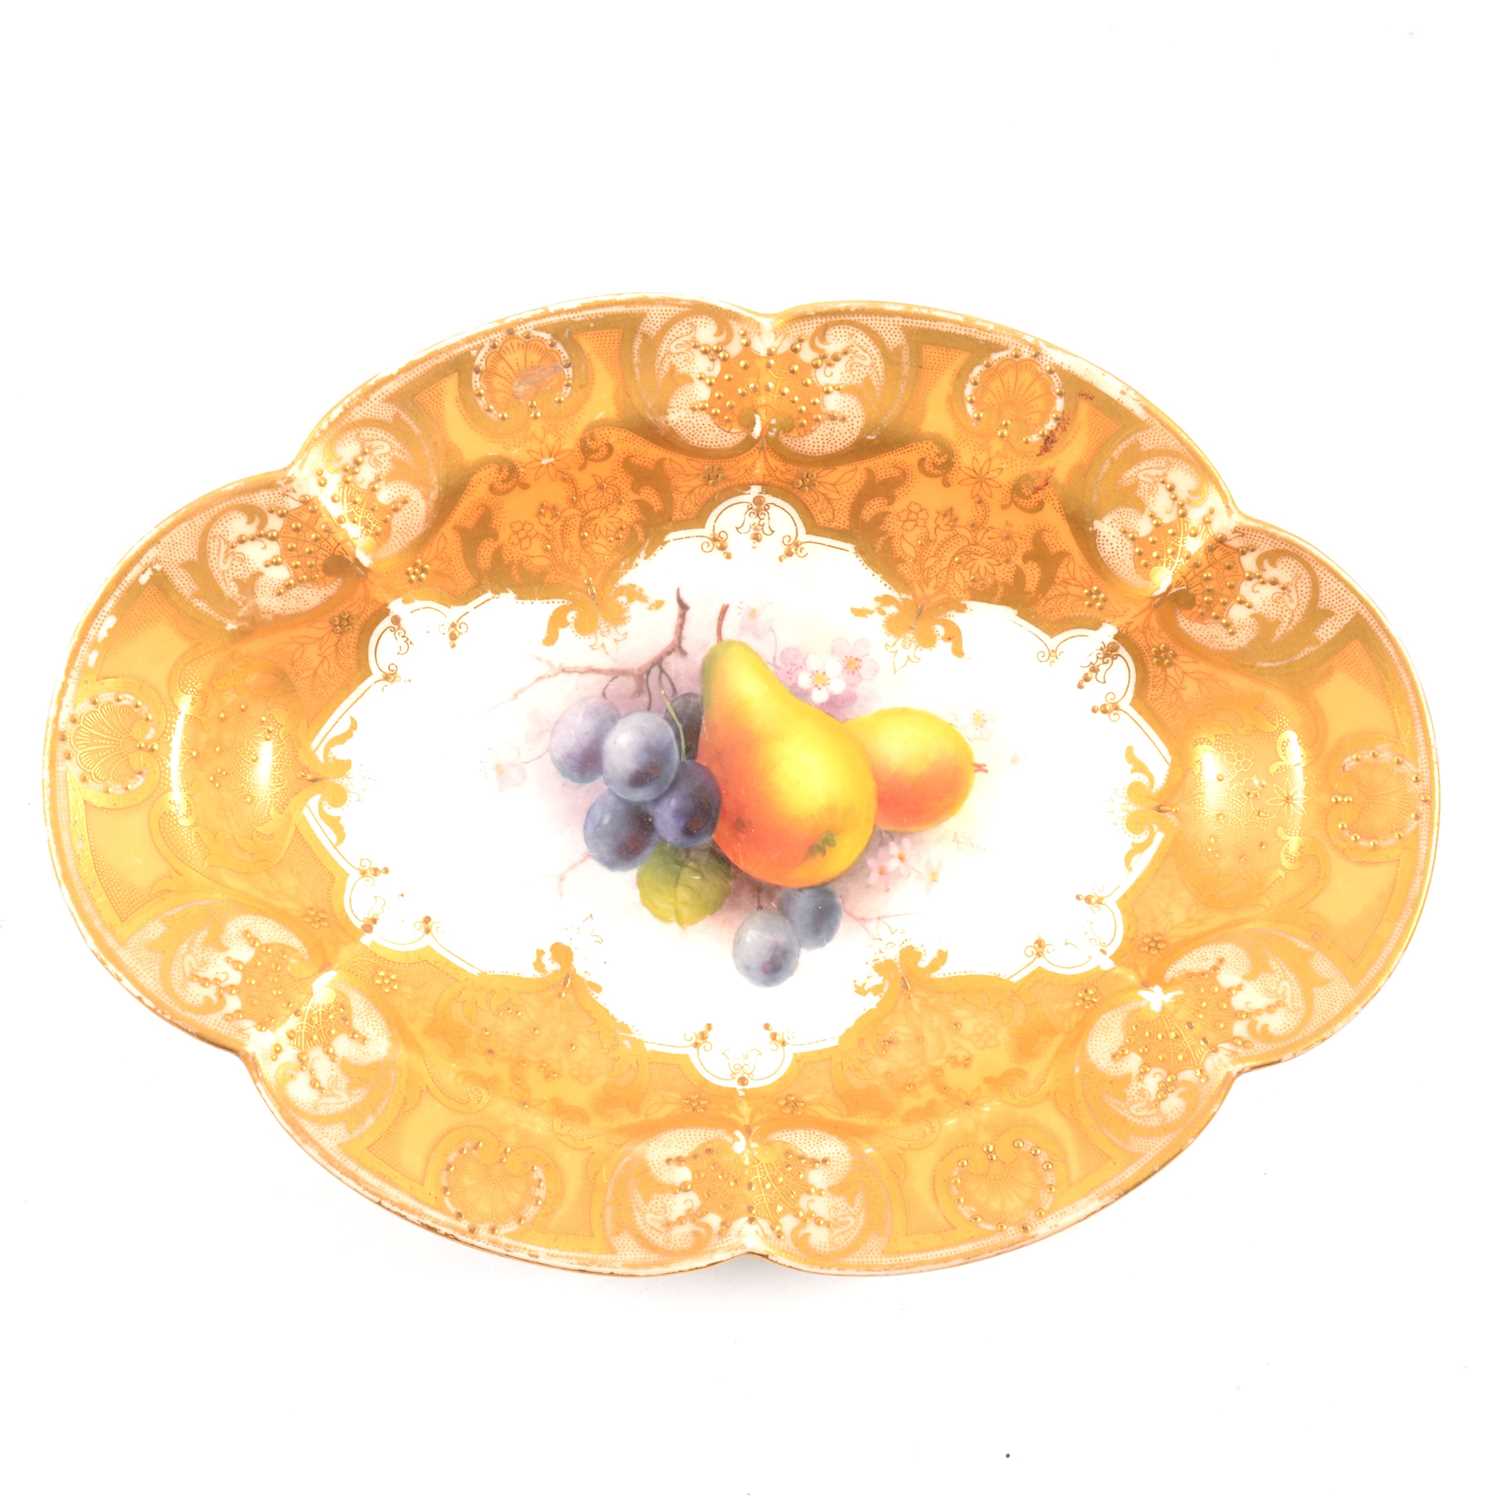 Lot 22 - Royal Worcester fruit painted oval dish, Albert Shuck, 1921